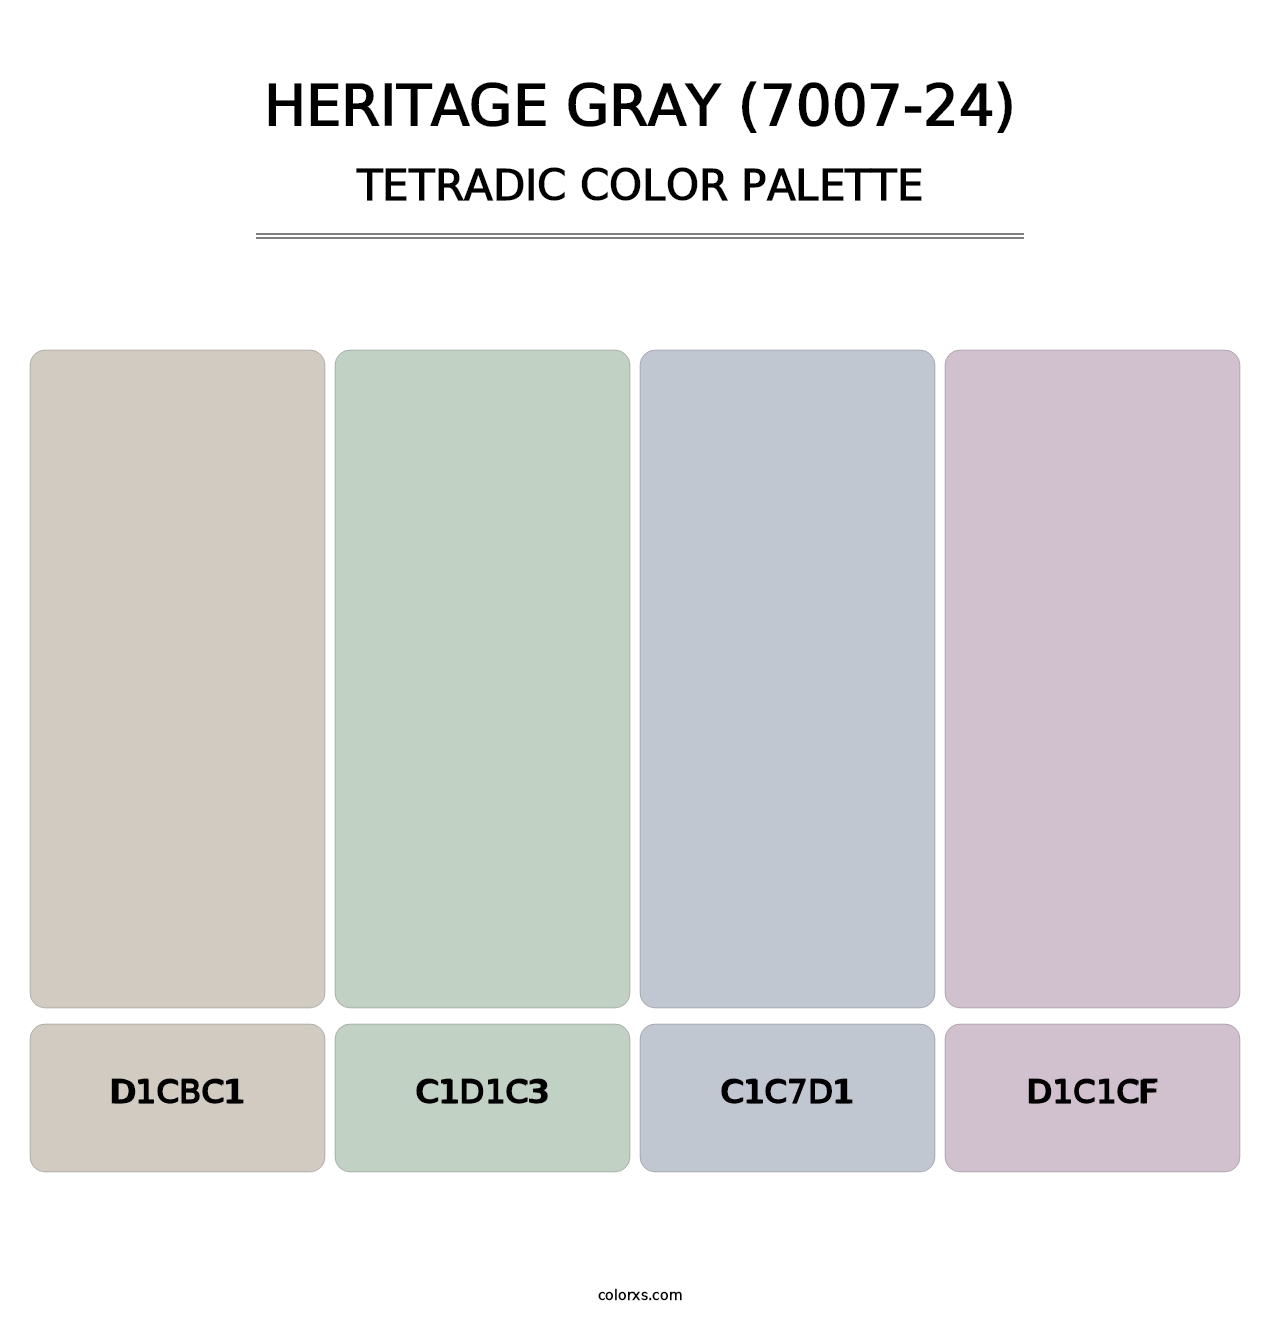 Heritage Gray (7007-24) - Tetradic Color Palette